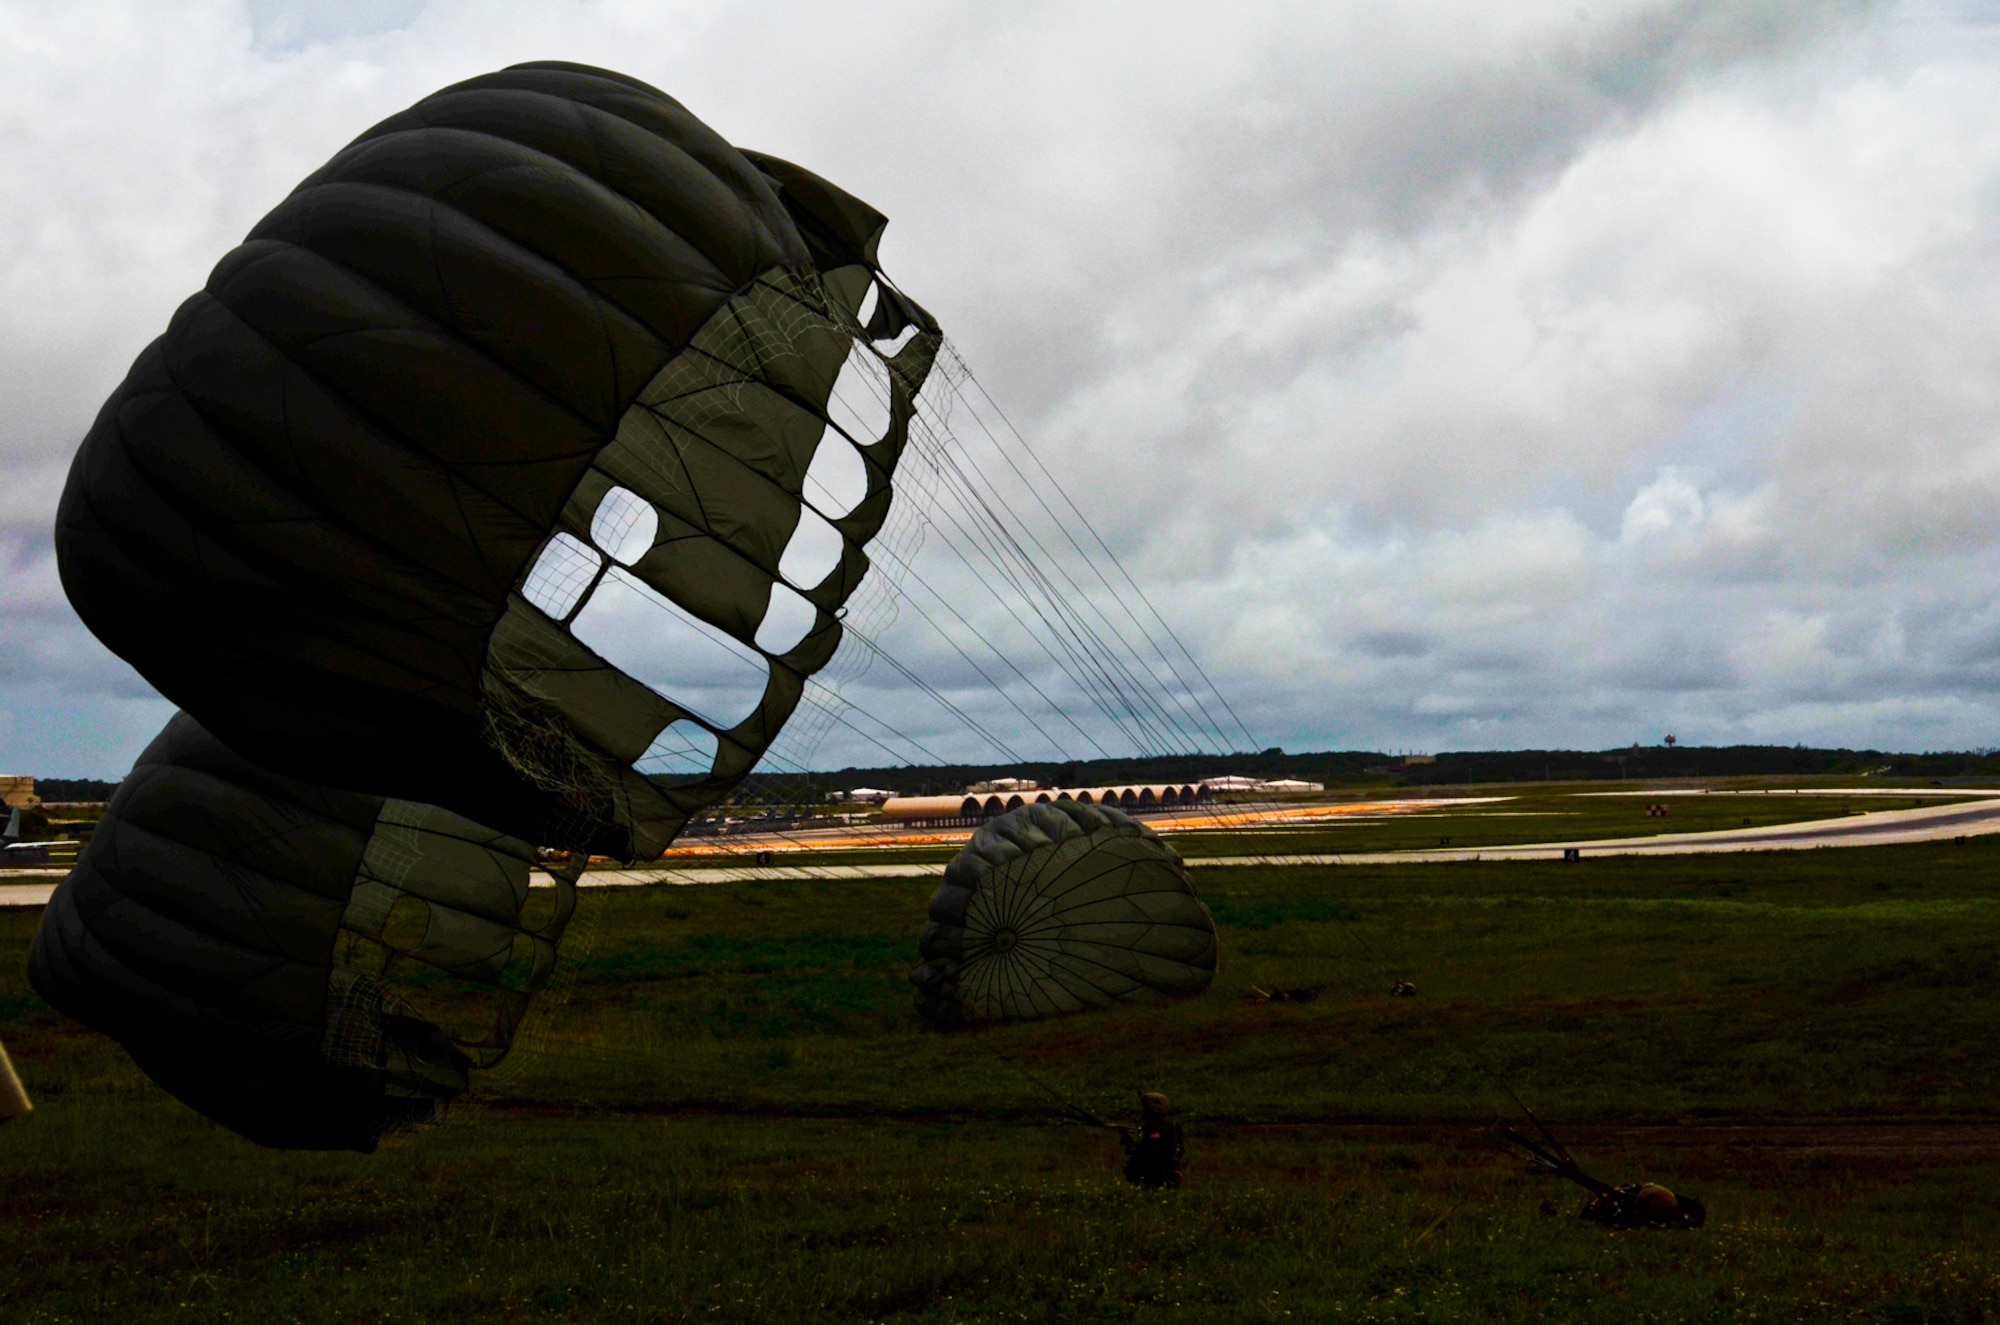 Members of the 736th Security Forces Squadron land on the drop zone Aug. 21, 2013, after a static line jump on the Andersen Air Force Base, Guam. As the integrated force protection element of the 36th Contingency Response Group, members of the 736th SFS provide a quick-response airborne capability that serves as an advance echelon team for contingency and humanitarian missions all over the Asia-Pacific region. (U.S. Air Force photo by Airman 1st Class Marianique Santos/Released)